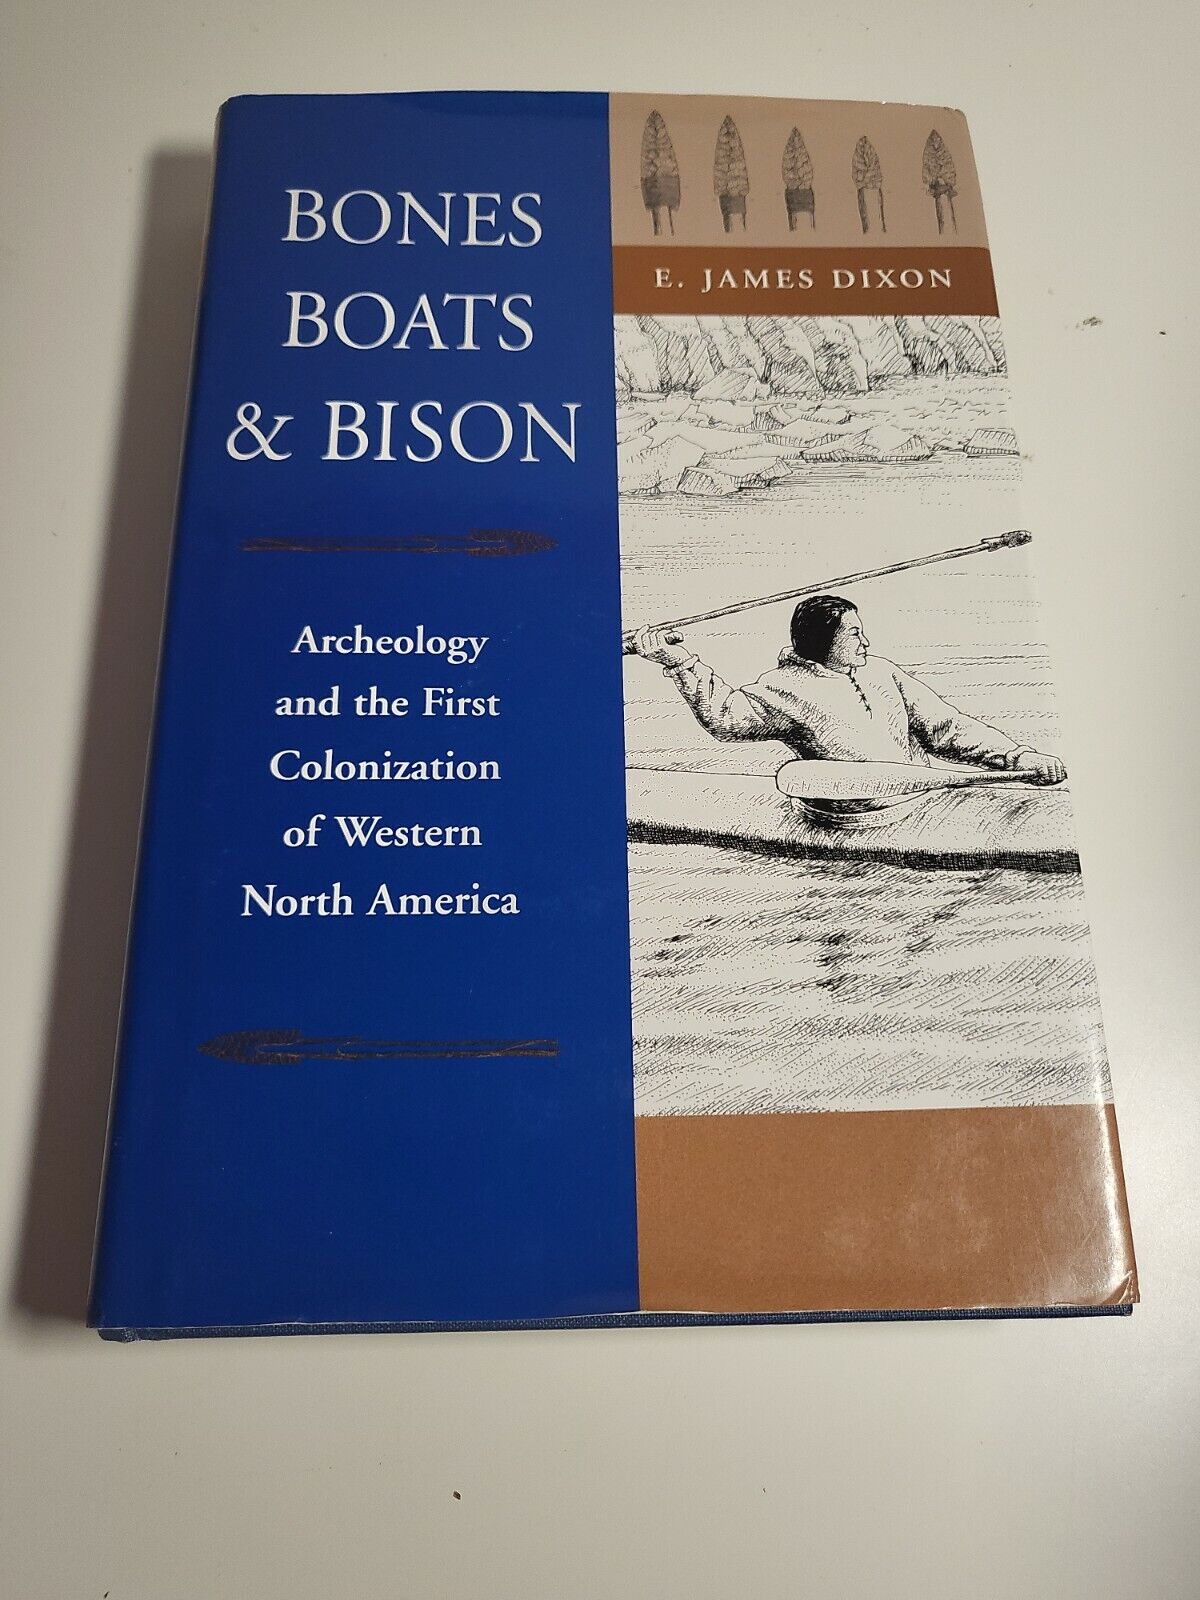 BONES, BOATS AND BISON: ARCHAEOLOGY AND THE FIRST By E. J. Dixon - Hardcover VG